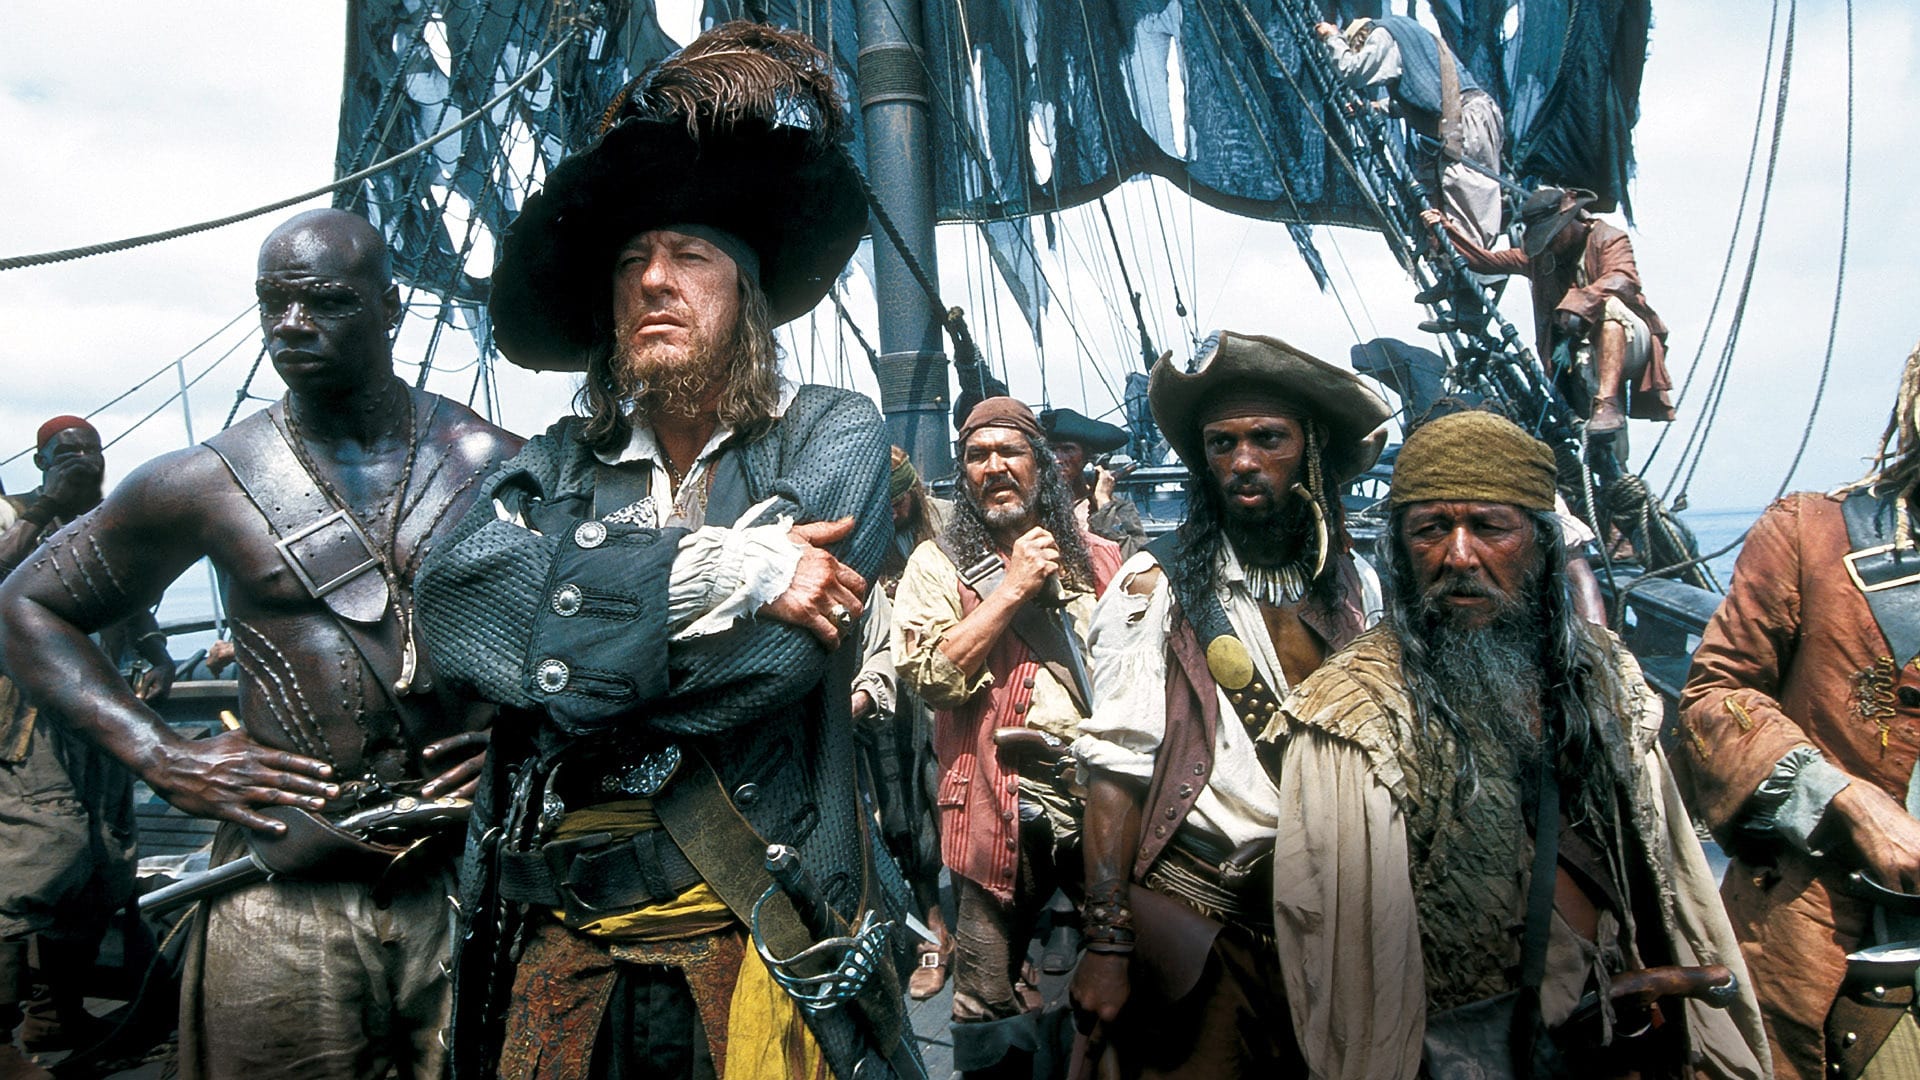 Cast Of Pirates Of The Carribean